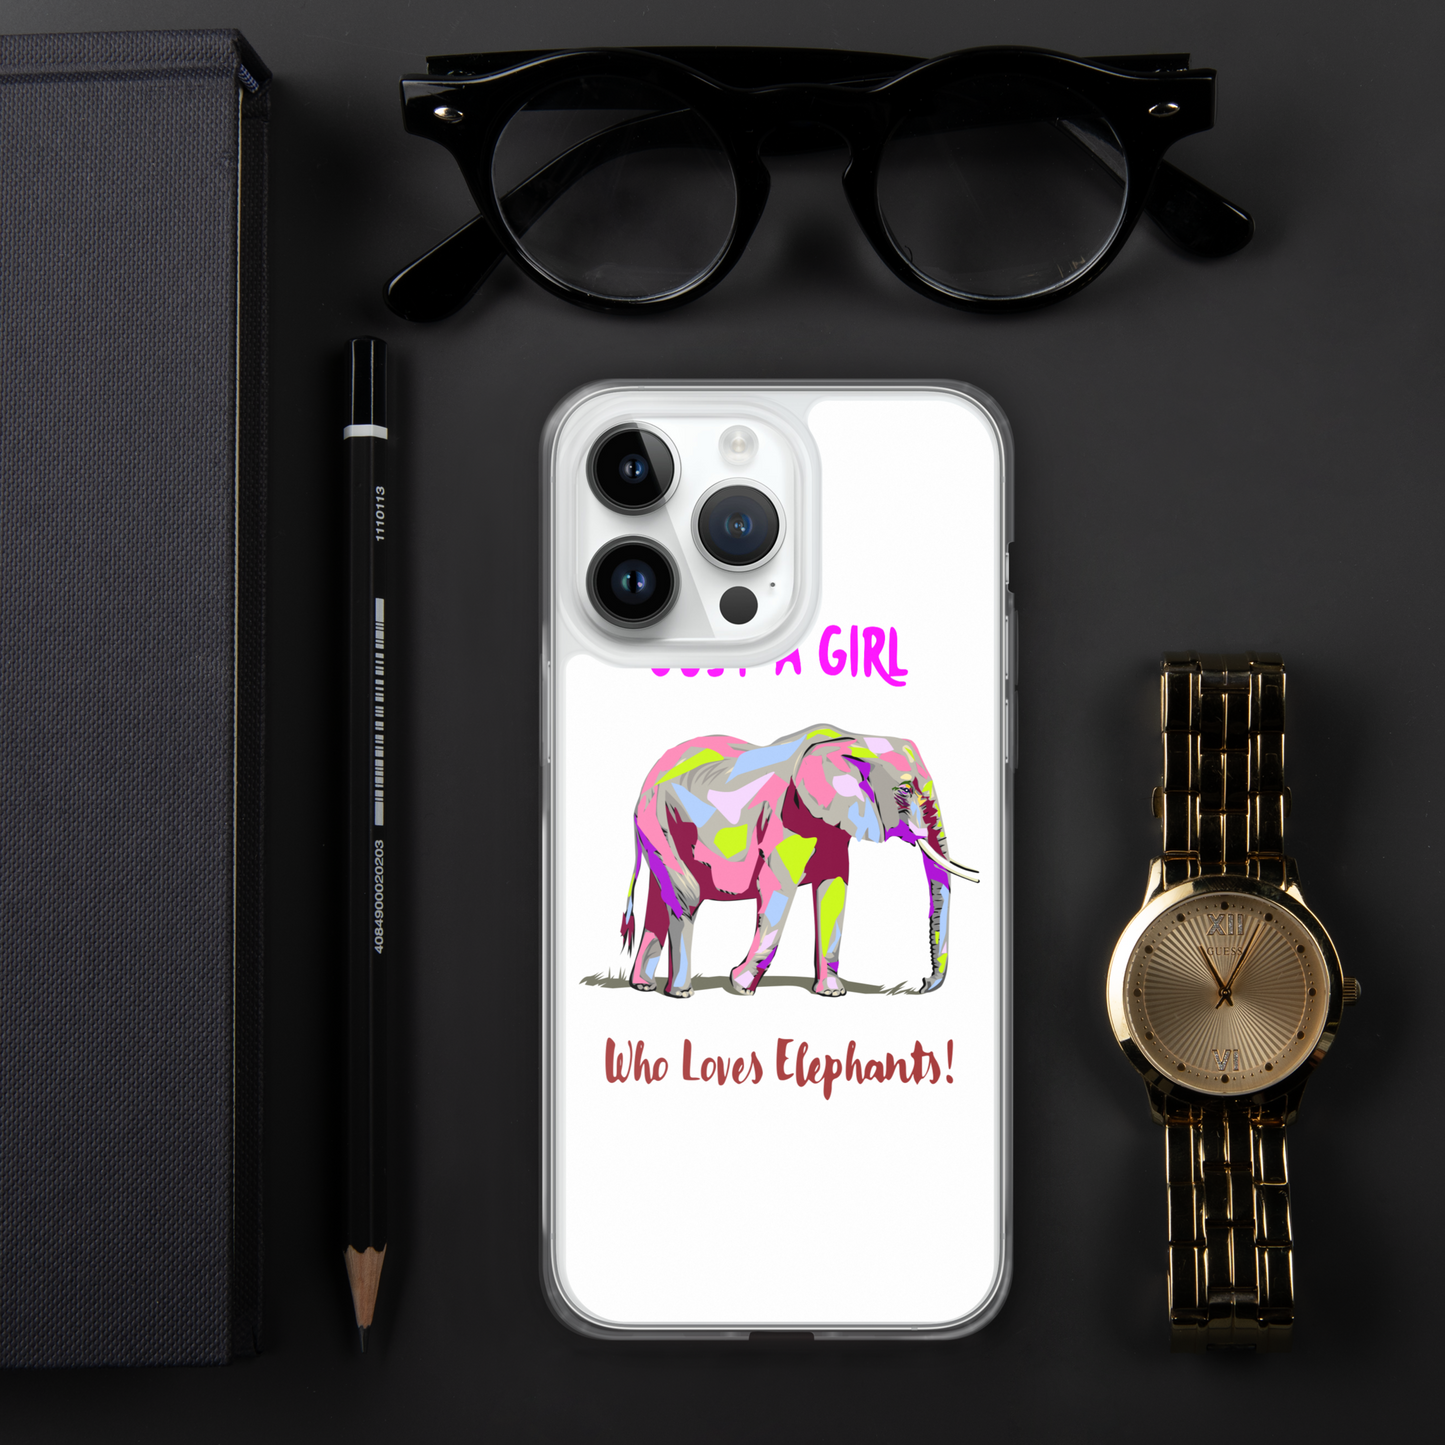 iPhone Elephant Case - Just a Girl who Loves Elephants with Writing, Multicolored Elephant iPhone Case